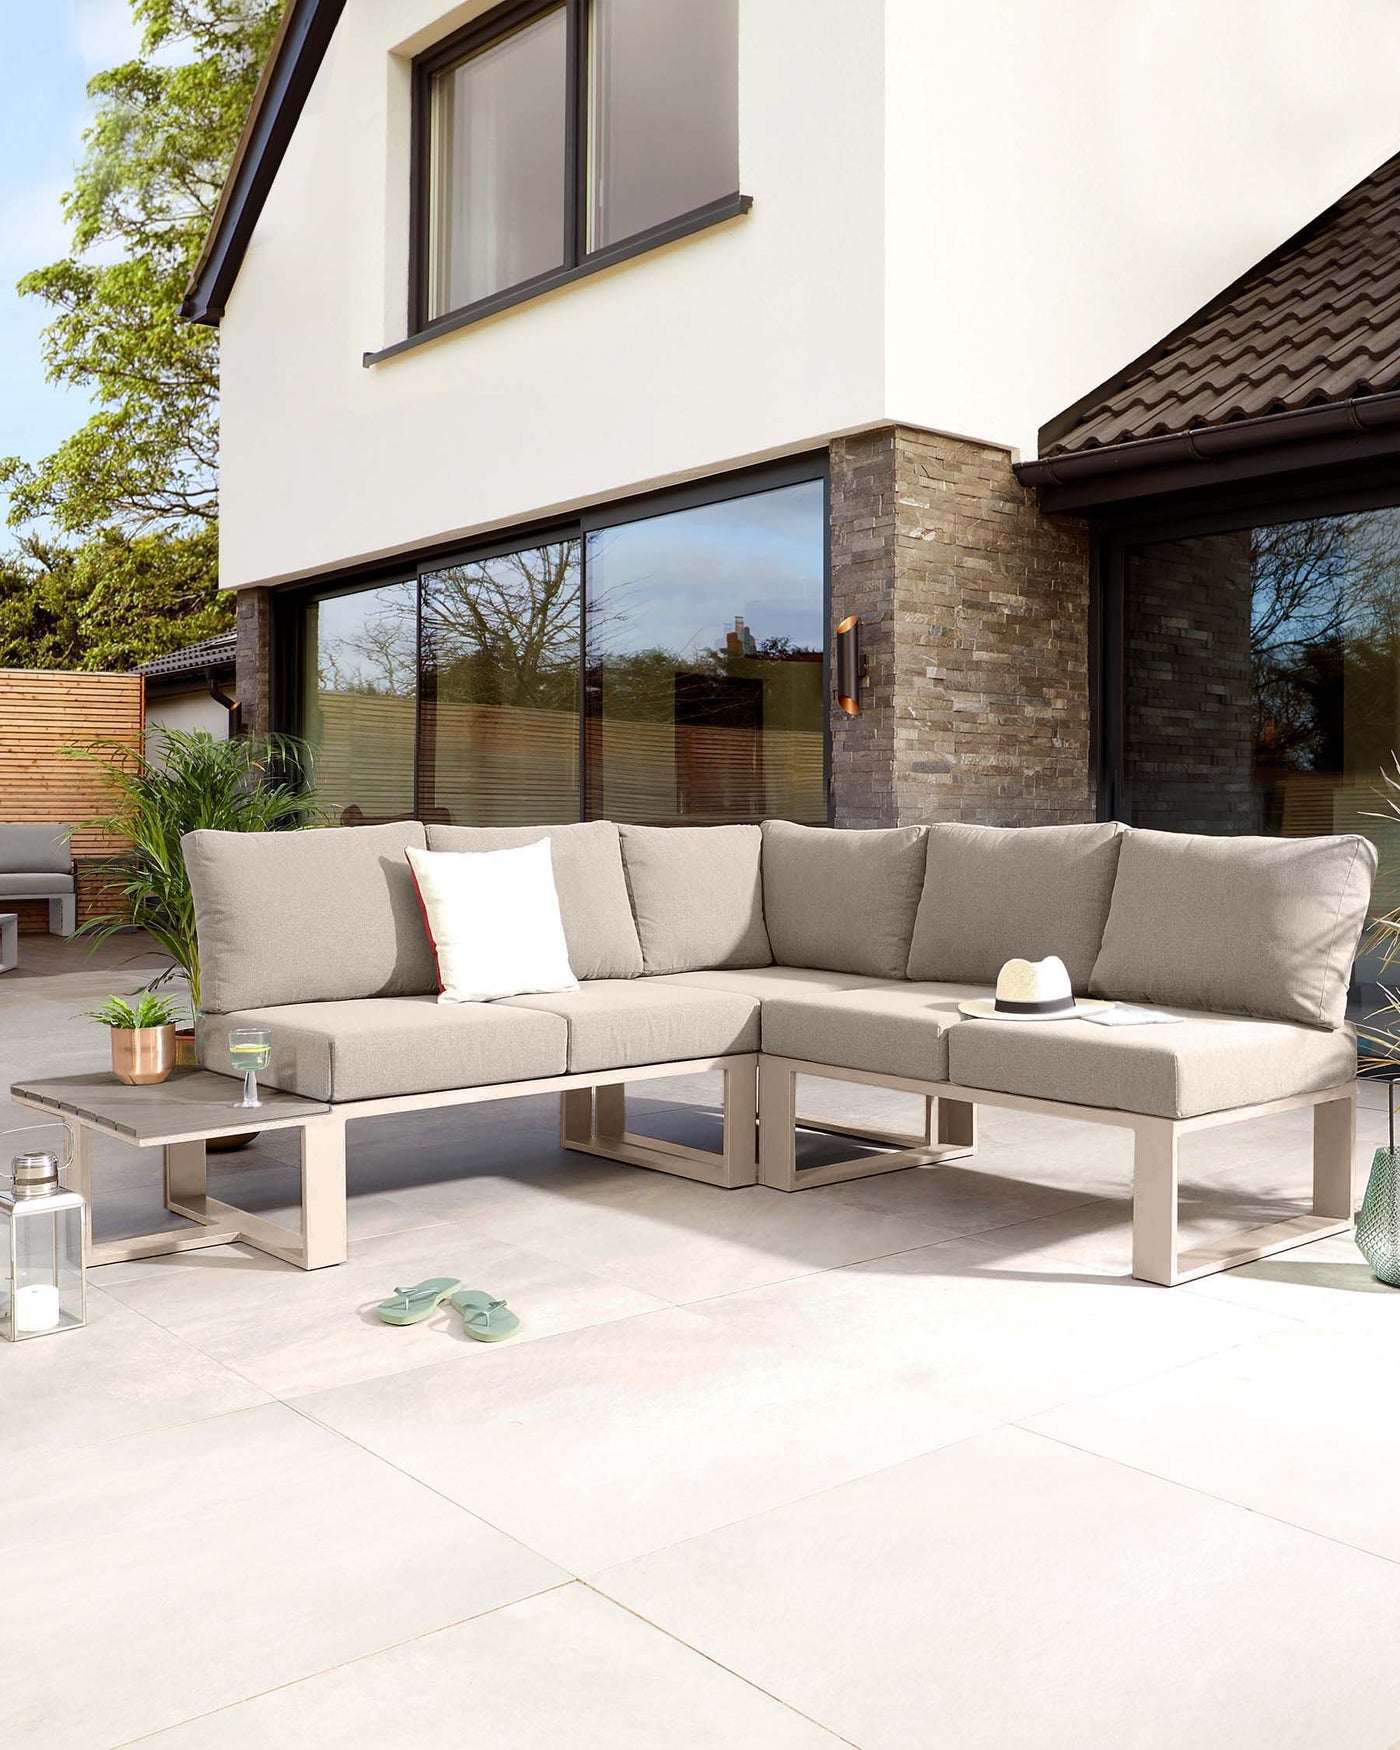 Contemporary outdoor L-shaped sectional sofa with beige cushions on a lightweight, minimalist aluminium frame, accompanied by a rectangular low-height coffee table featuring a matching aluminium base and a light-coloured tabletop, displayed on a patio setting.